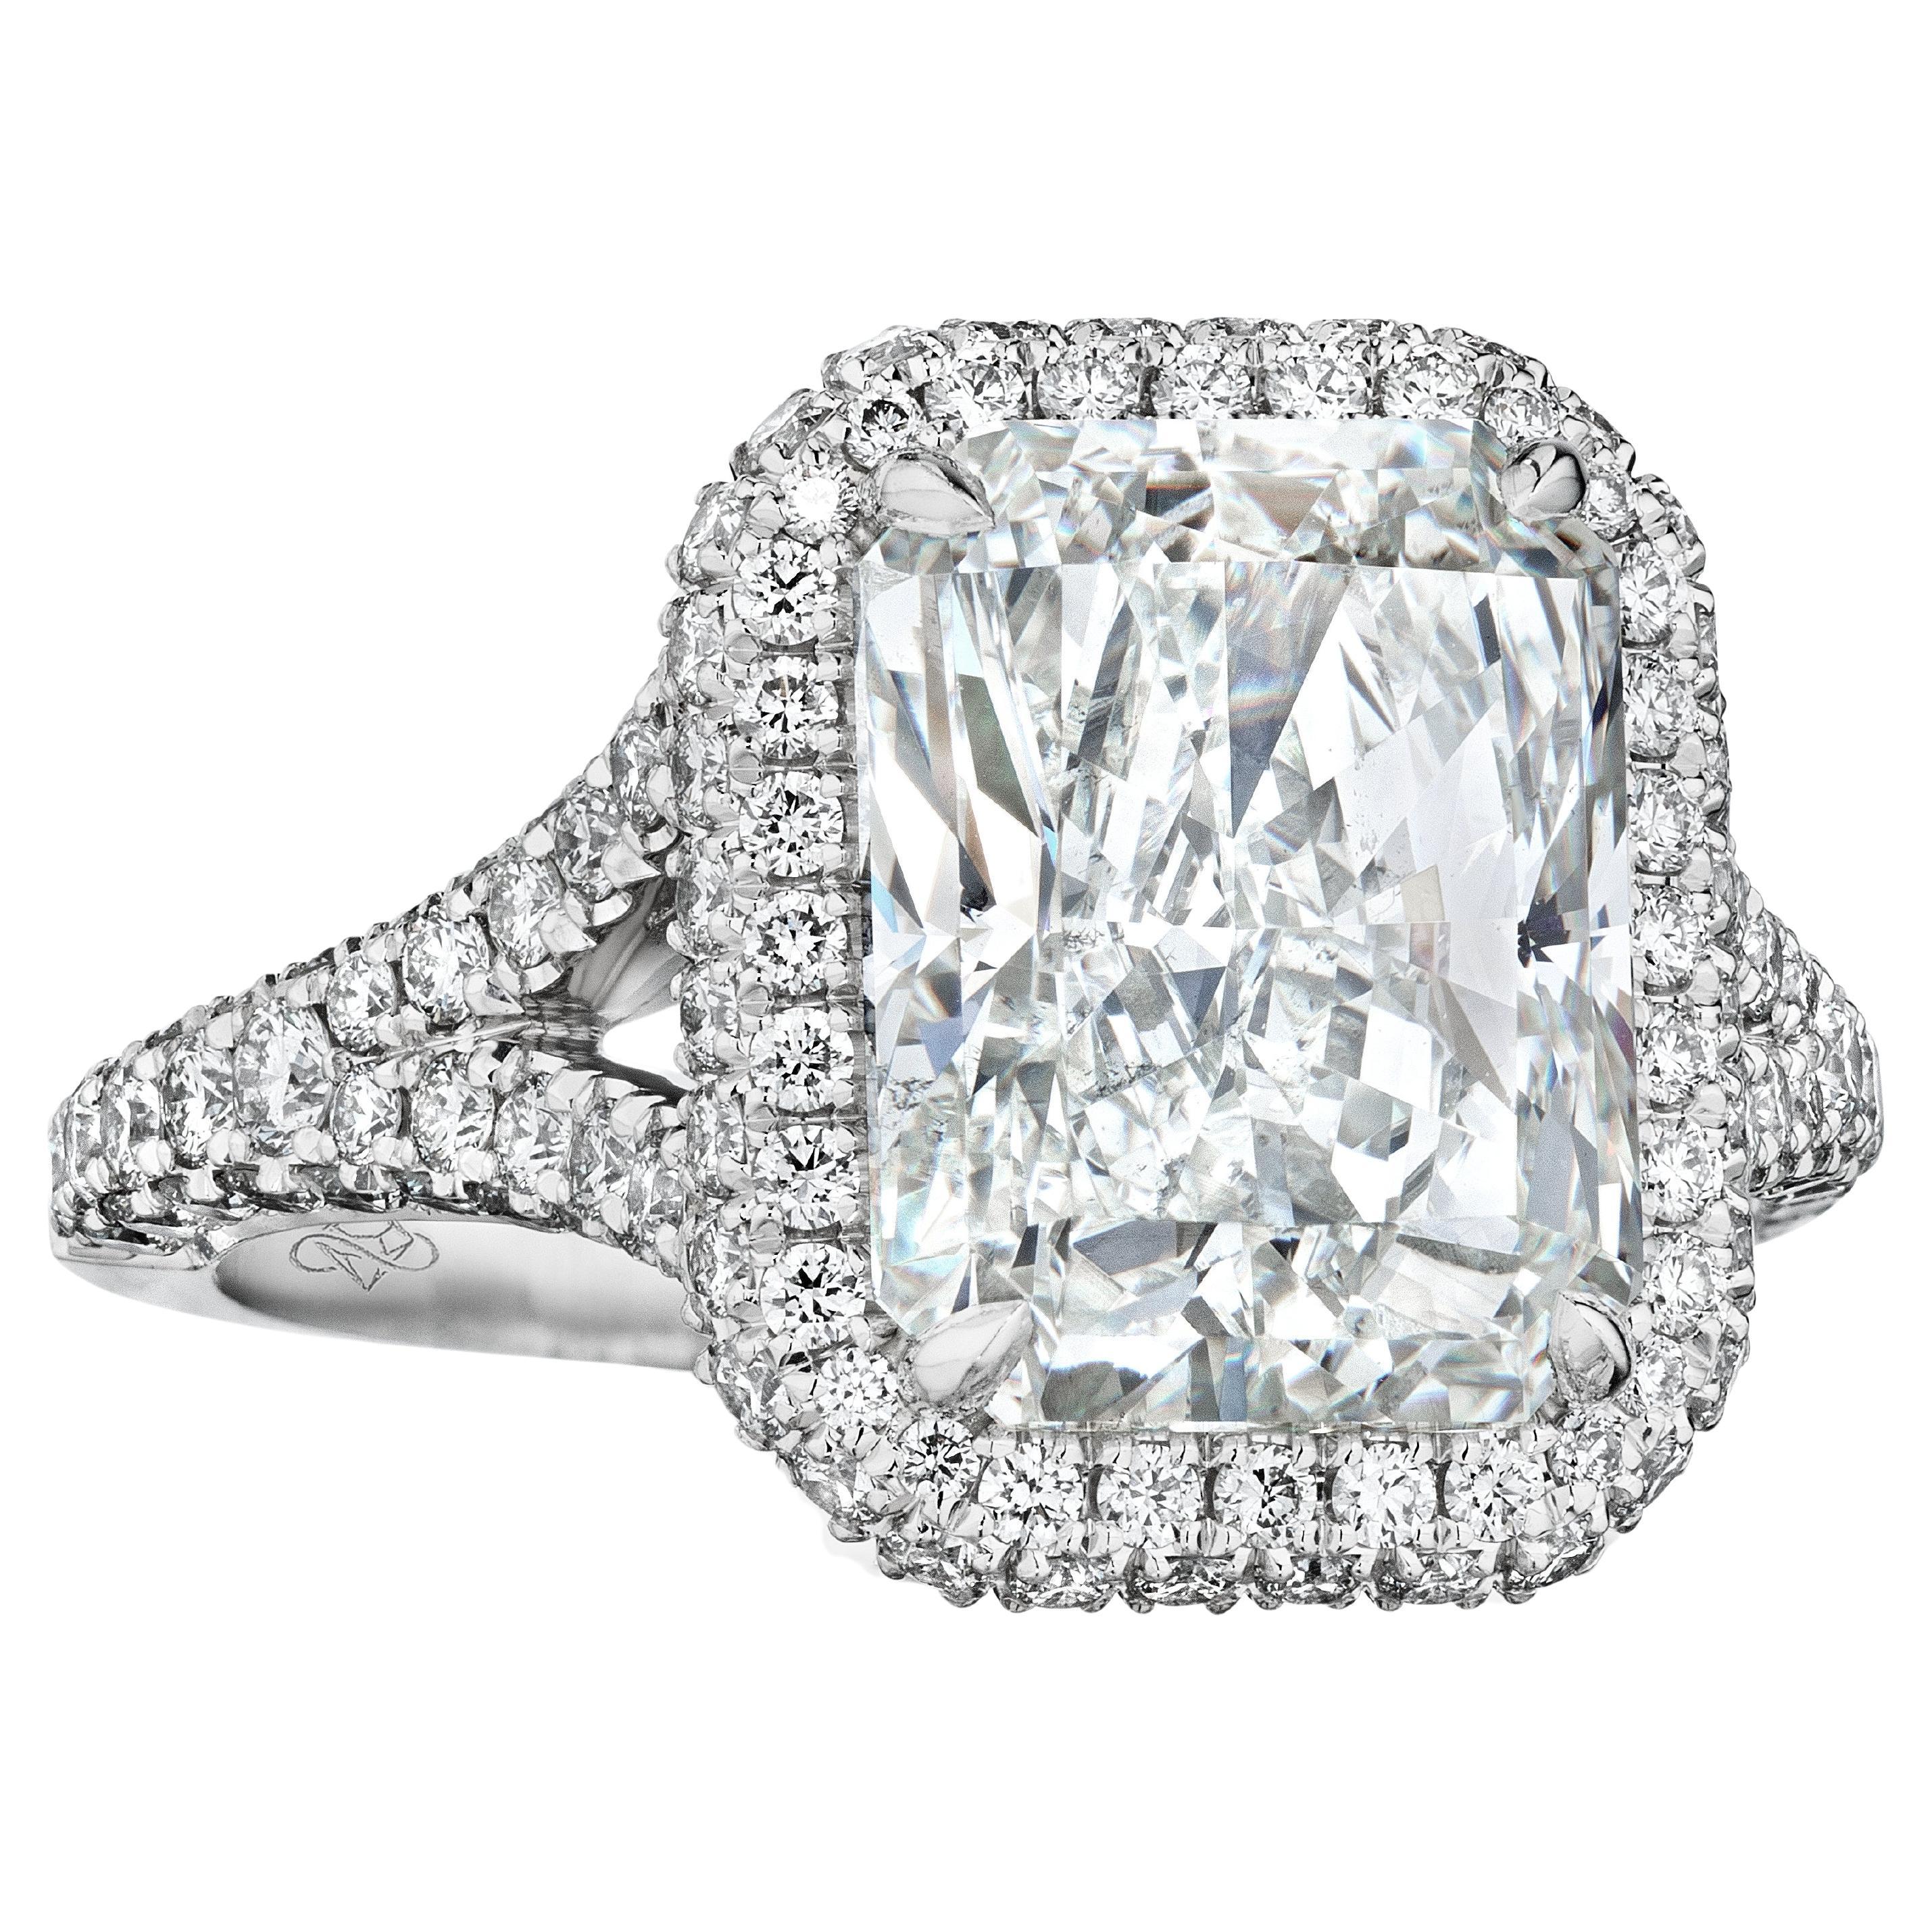 GIA Certified 4.14 Carat F VS2 Radiant Diamond Engagement Ring "Patricia" For Sale